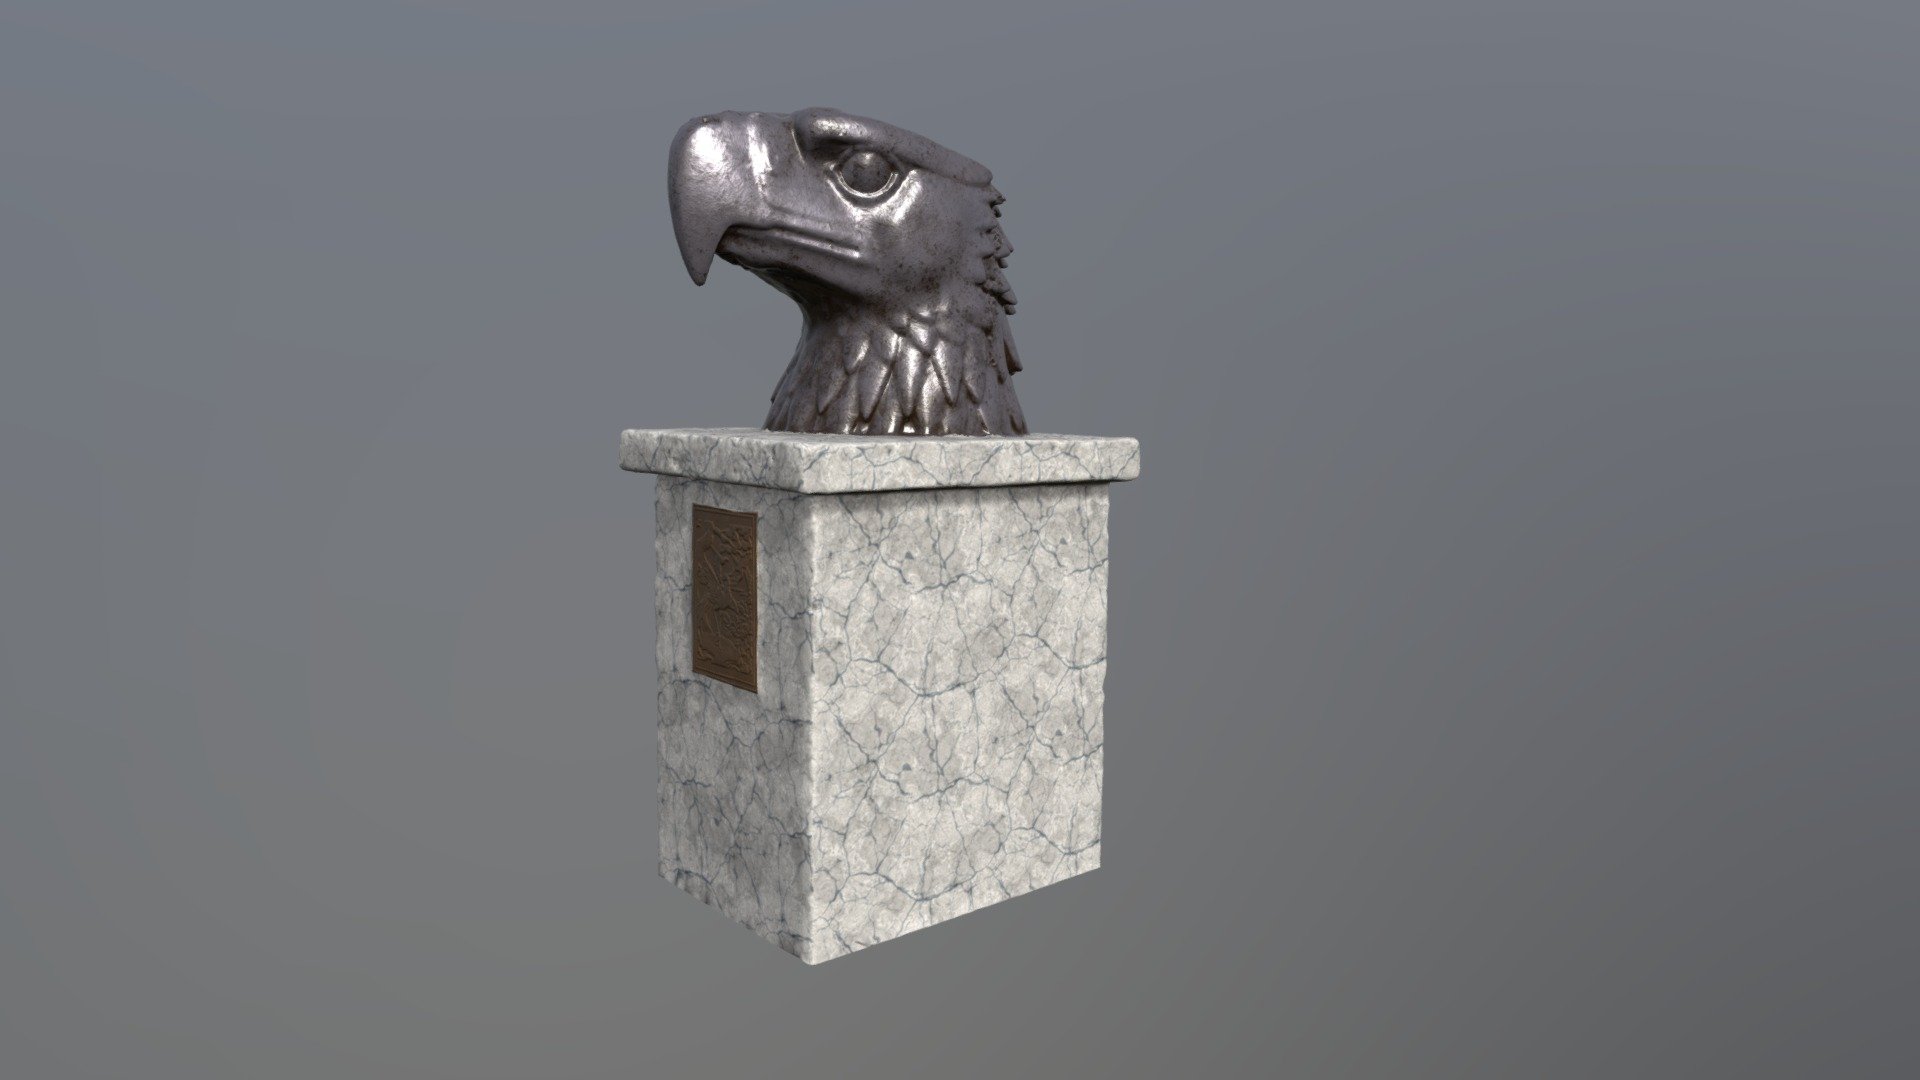 German Aegle ( Reichs Adler Tempelhof ) 

Scan in Berlin and retopo. 
2k Supstance painter textures. 
Ww2 Germany Styled Eagle.  Head and Marble

3D PRINT READY !!

No with AI maked. Handmake with time and love =) 
with love hand made textures in painter. Iam Historican,
Game ready model for unreal, unity engine. For scenes, videos, games.
4k PBR  textures in substance painter. Albedo, Metalic + rougness, Normal map. 
gizmos ready. You need somting ? PM me =)
ready for 3D printing
Blender 2.9 modeled
Blender 2.9 modeled
Substance painter original textures 2k res. 
Realstic scale asset and game ready.
Download includes:
2k &amp; 4k PBR textures
.blend file
.fbx - German Aegle ( Reichs Adler Tempelhof ) - Buy Royalty Free 3D model by Thomas Binder (@bindertom61) 3d model